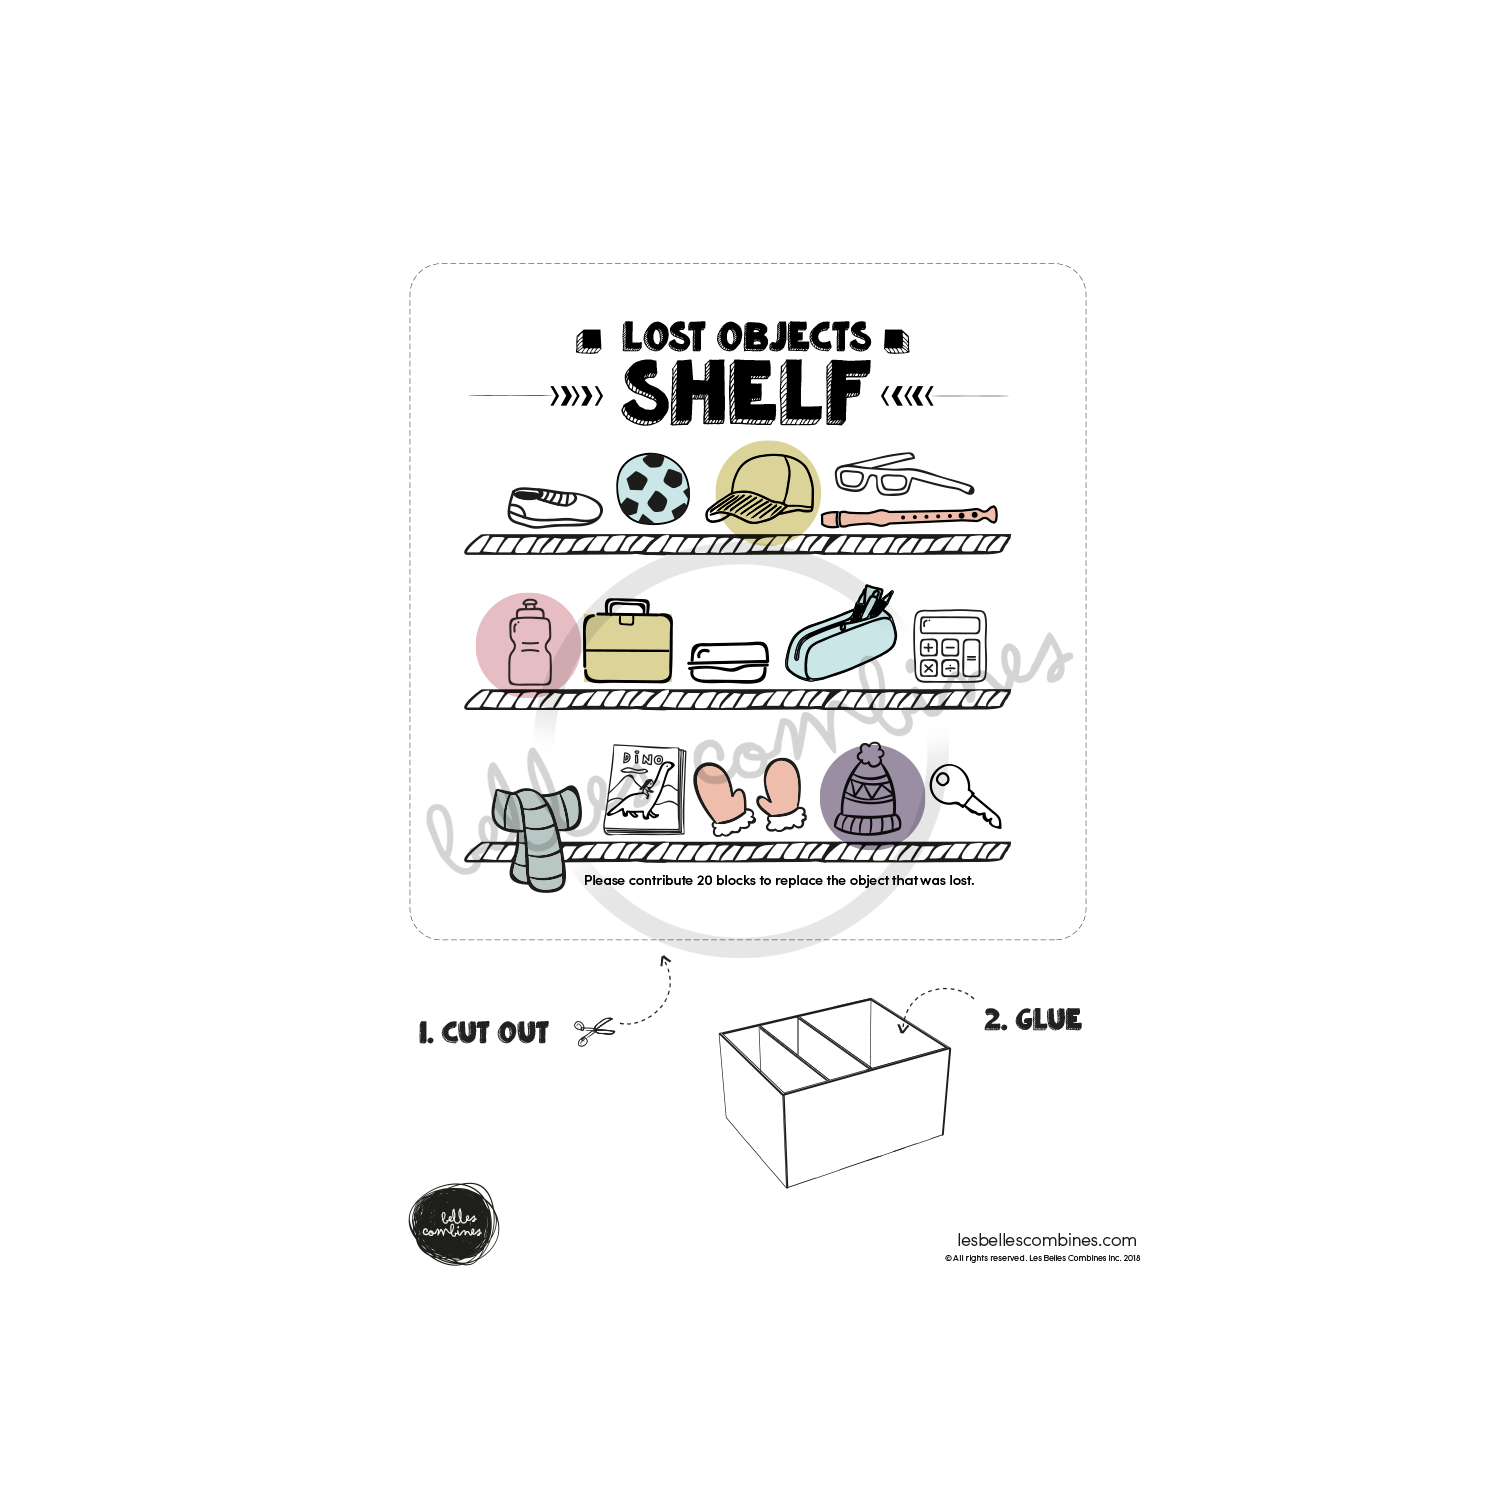 English version of the lost objects shelf to print for the general store Les Belles Combines